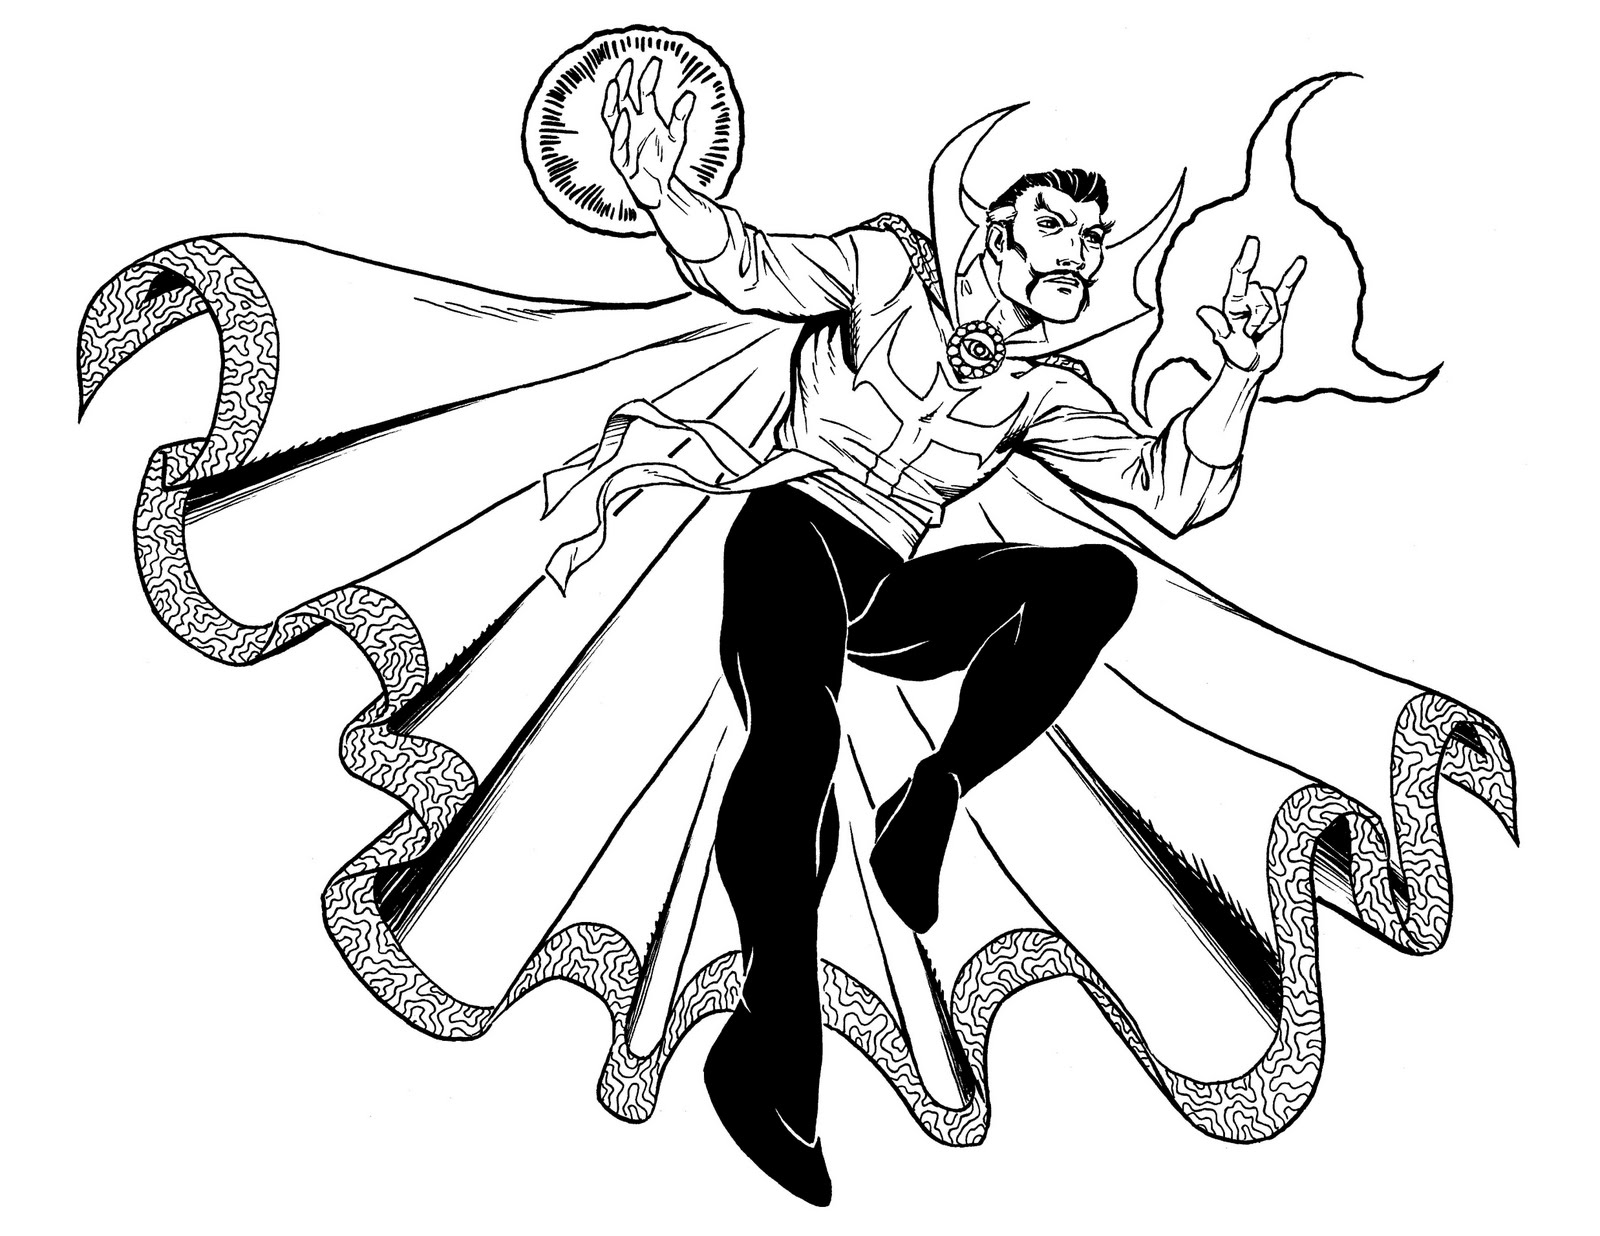 Doctor Strange Coloring Pages - Coloring Home